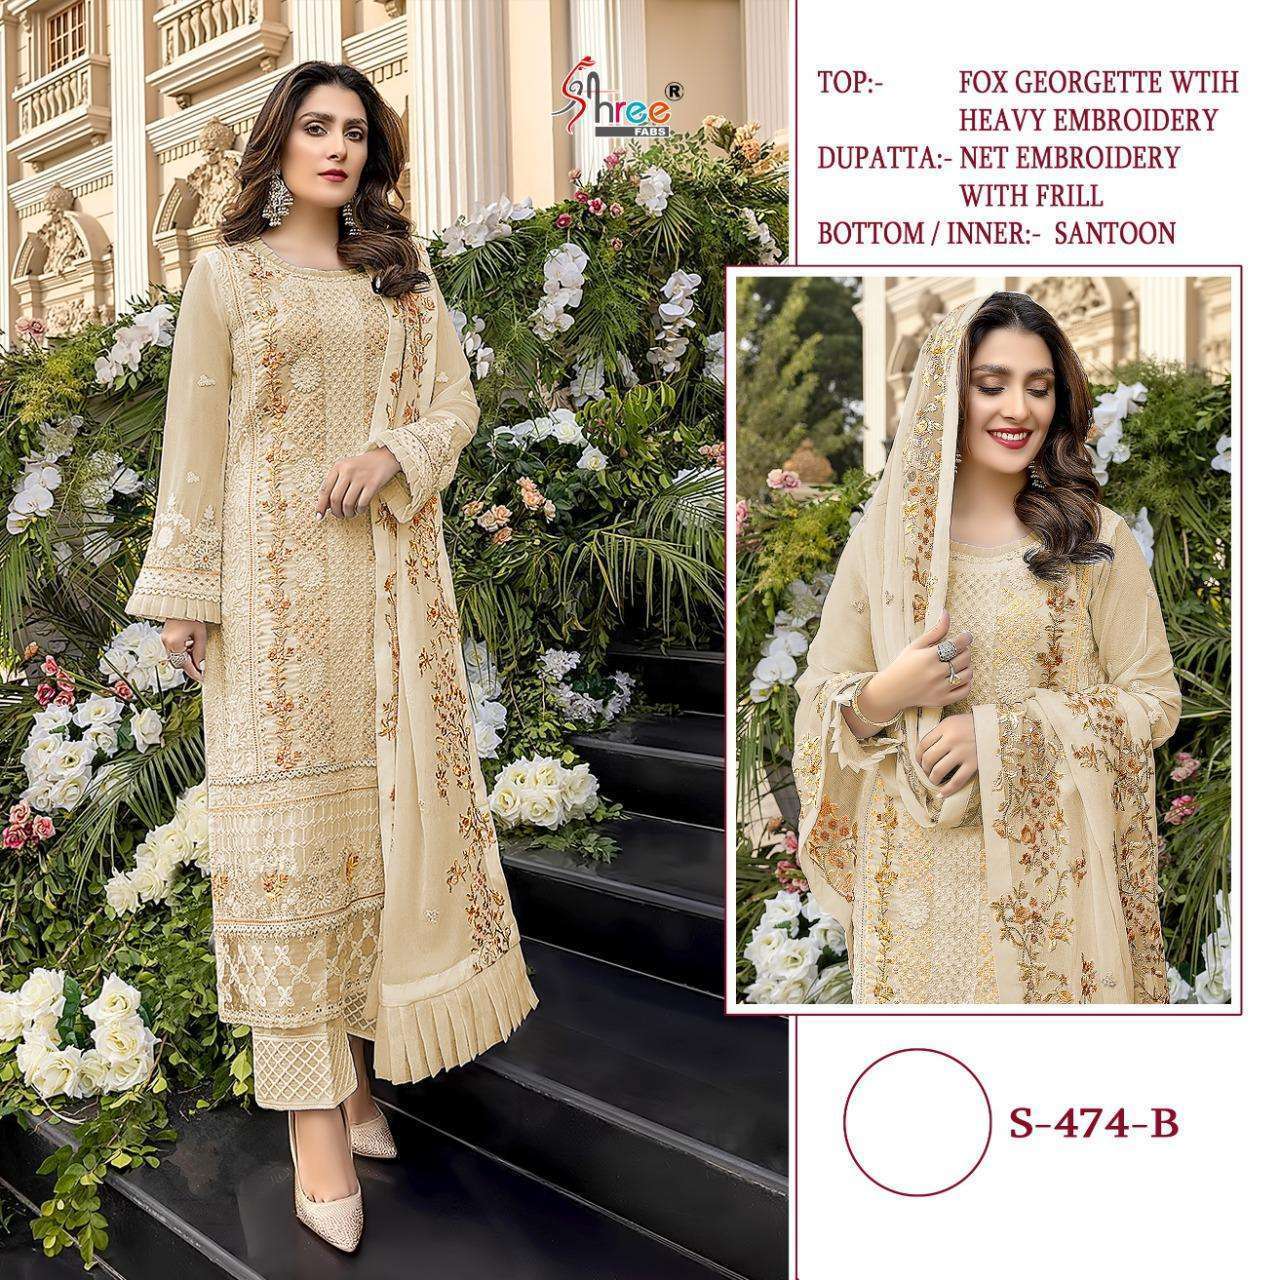 SHREE FABS PRESENTS S 474 COLORS GEORGETTE WITH EMBROIDERY WHOLESALE PAKISATANI SUITS